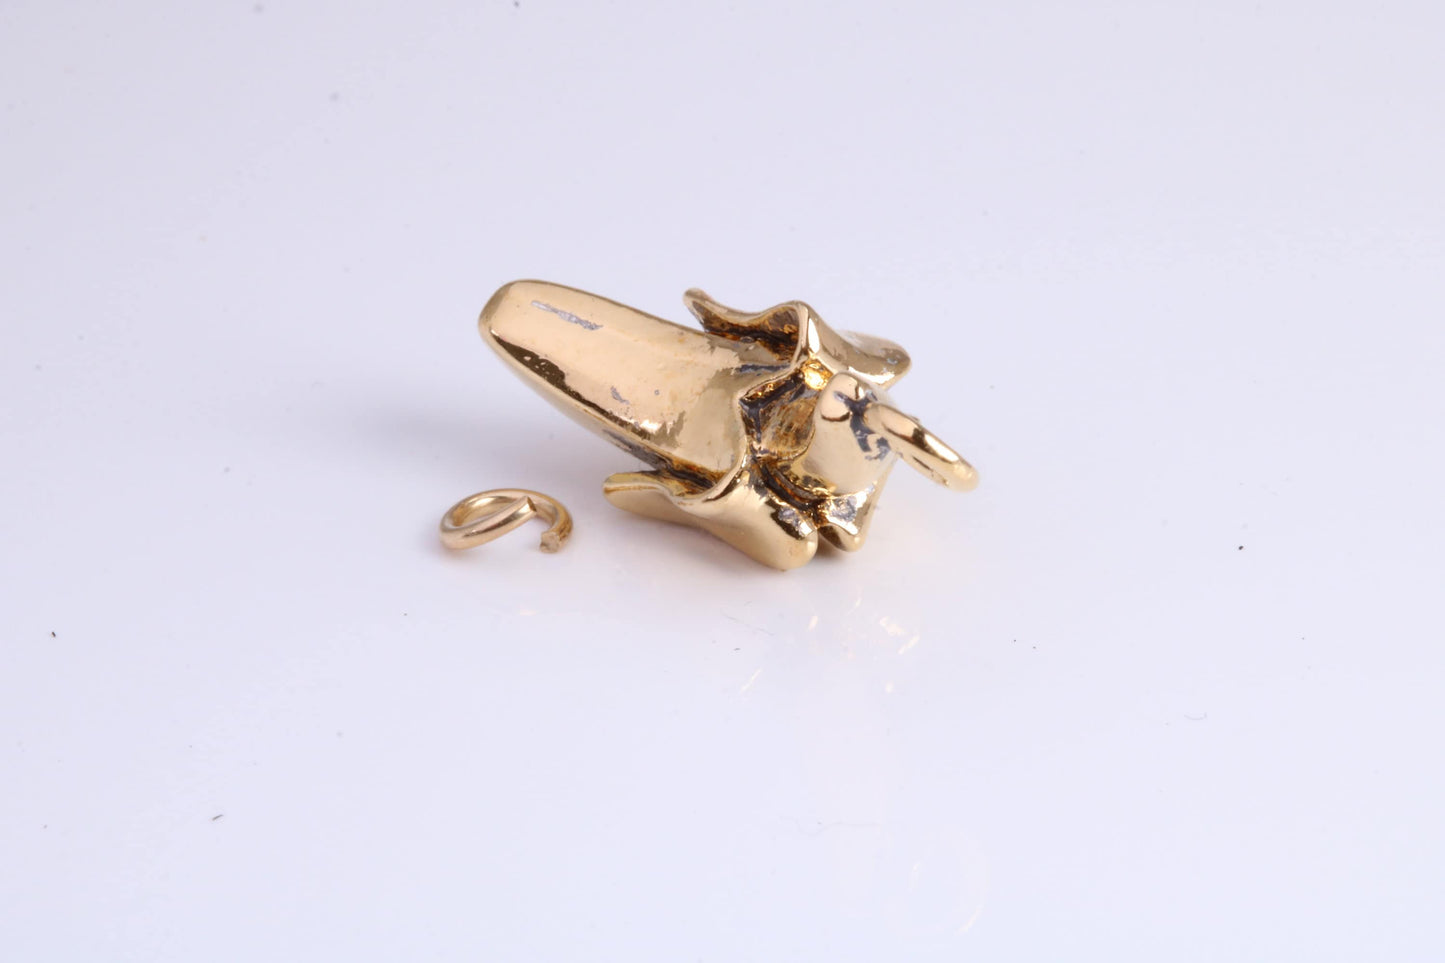 Banana Charm, Traditional Charm, Made from Solid Yellow Gold, British Hallmarked, Complete with Attachment Link